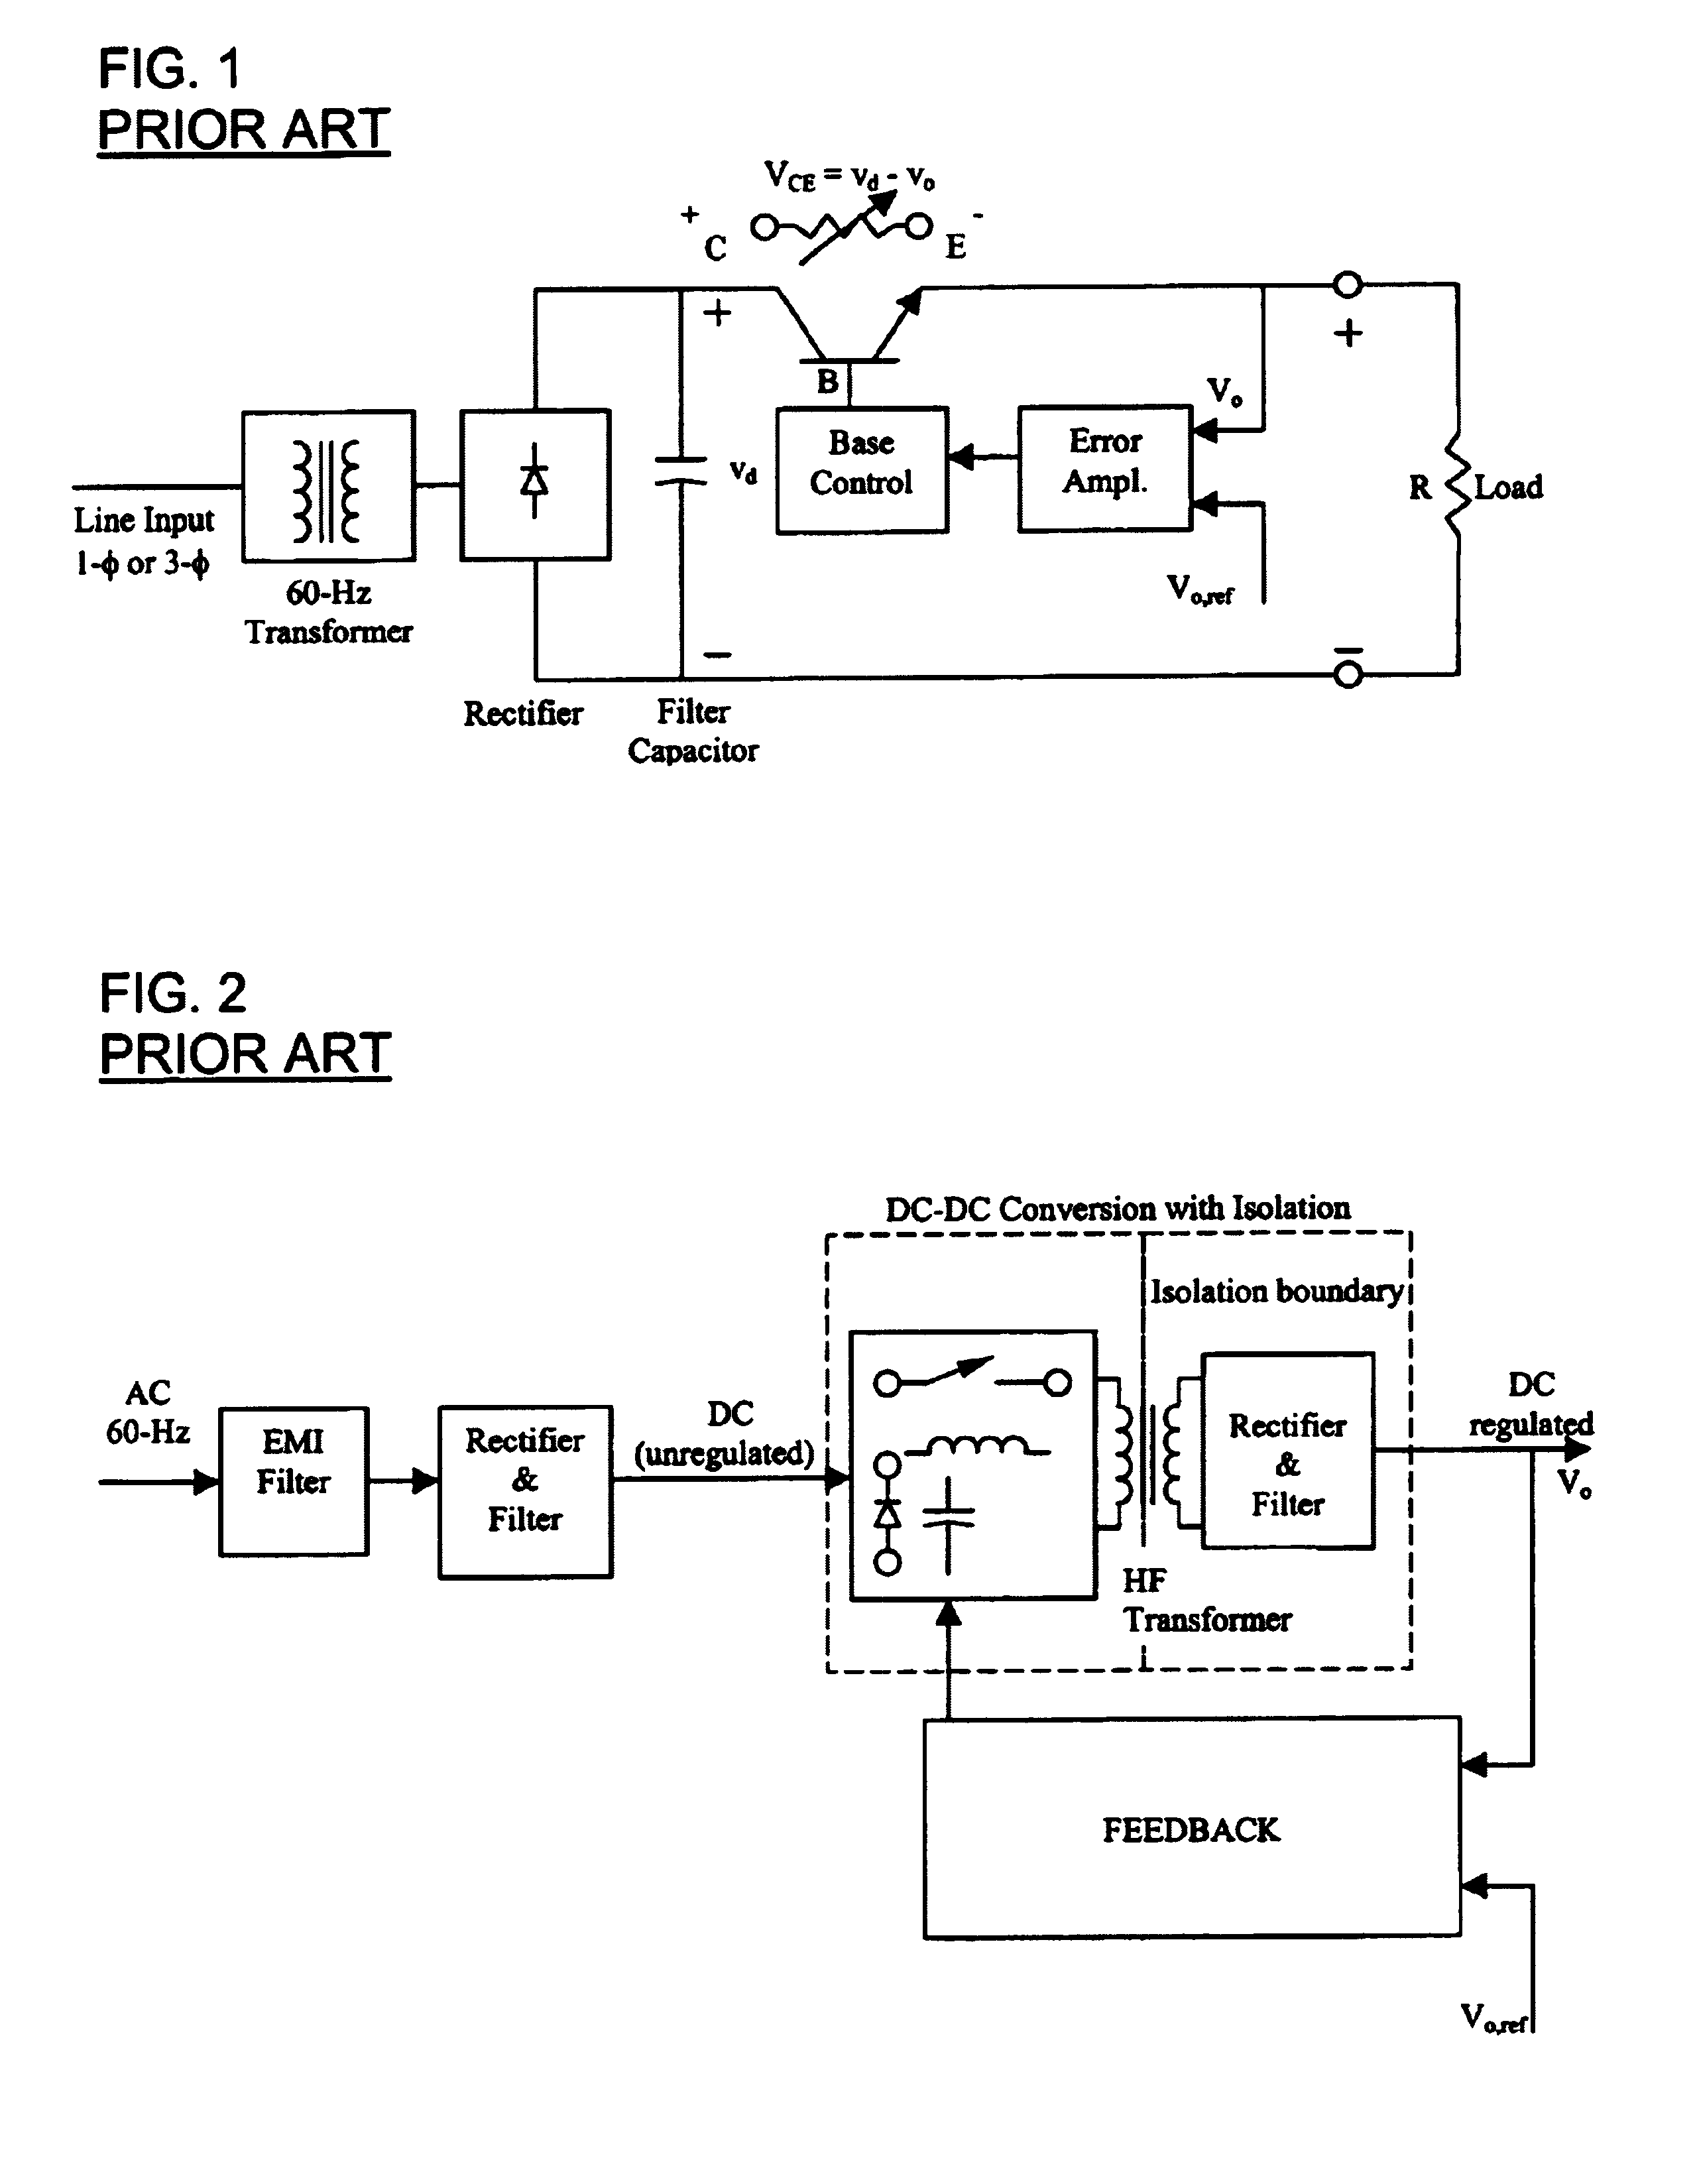 Piezoelectric transformer and modular connections for high power and high voltage power supplies